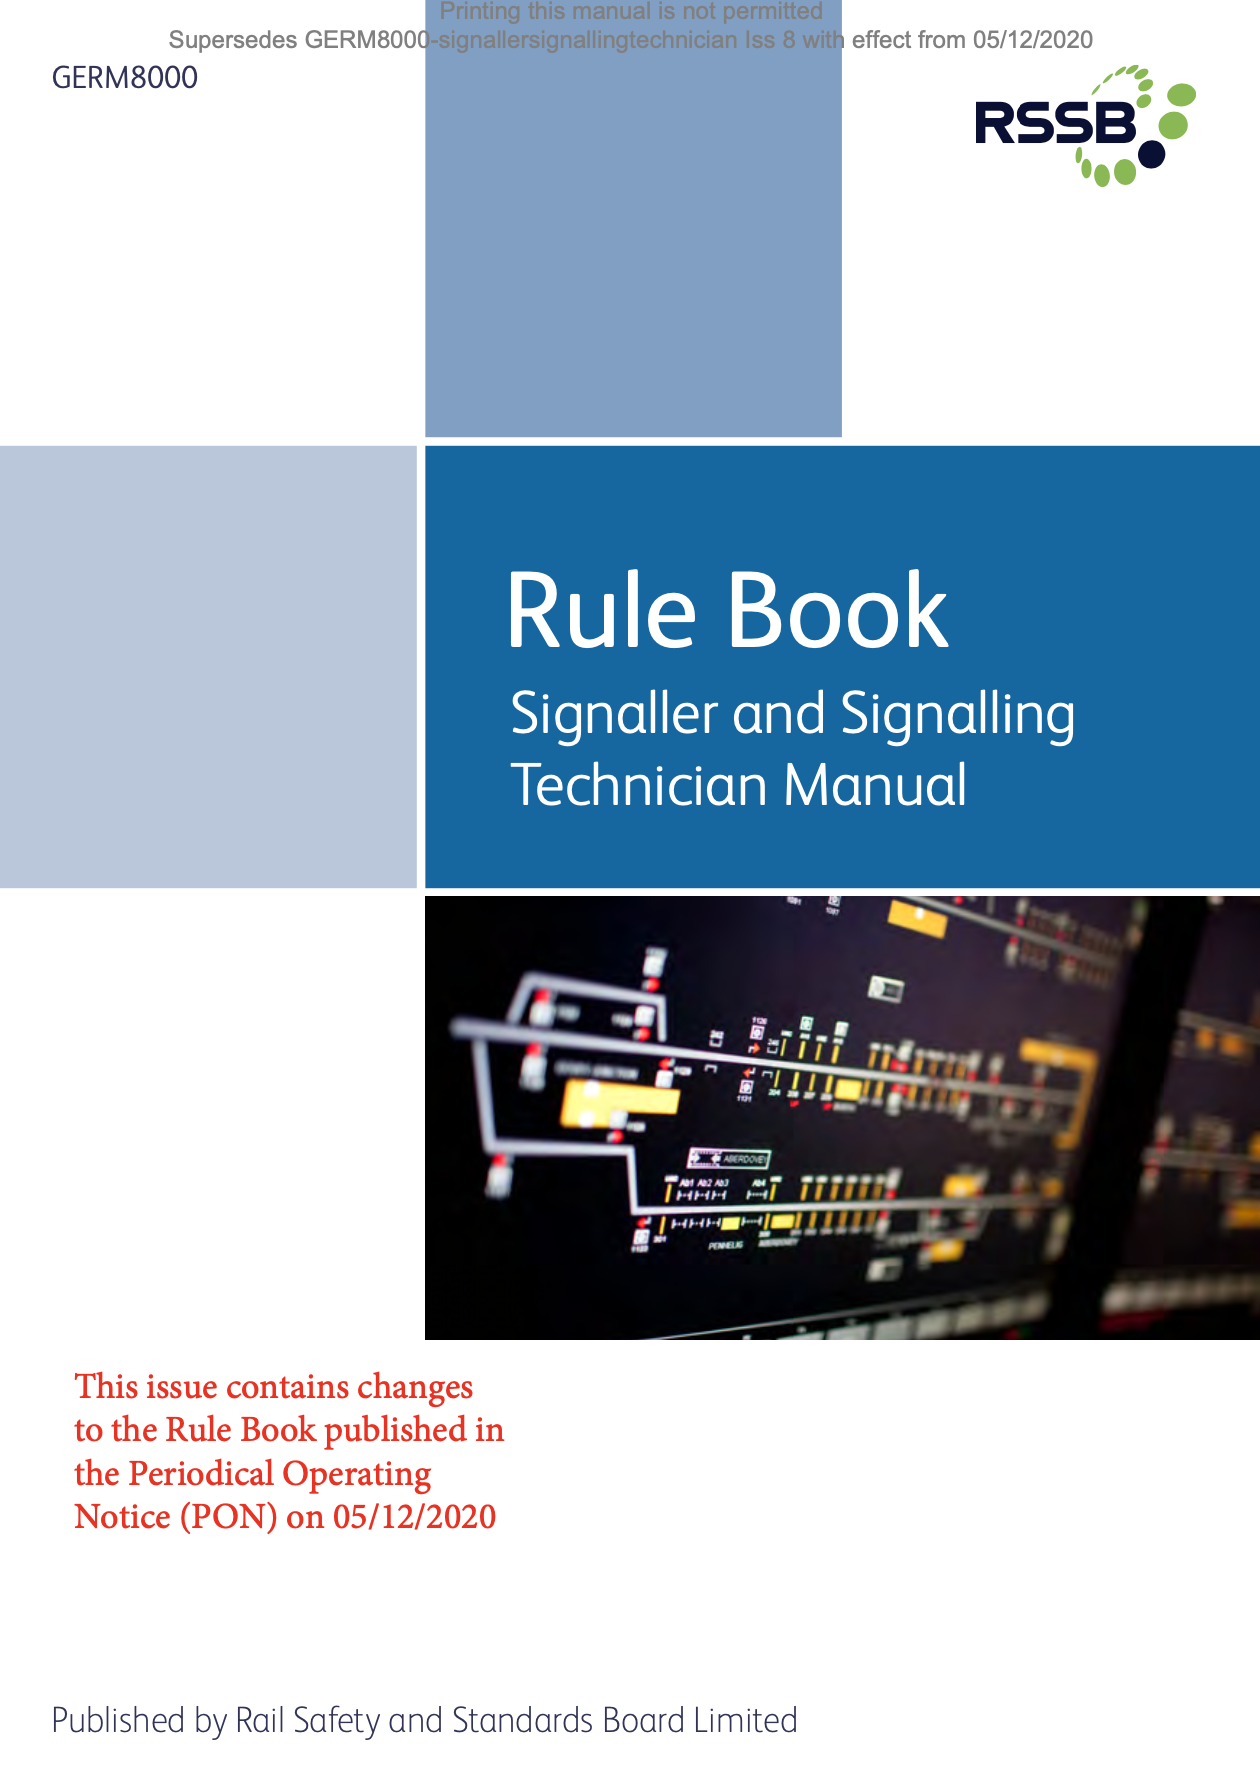 Signaller and Signalling Technician Manual Cover